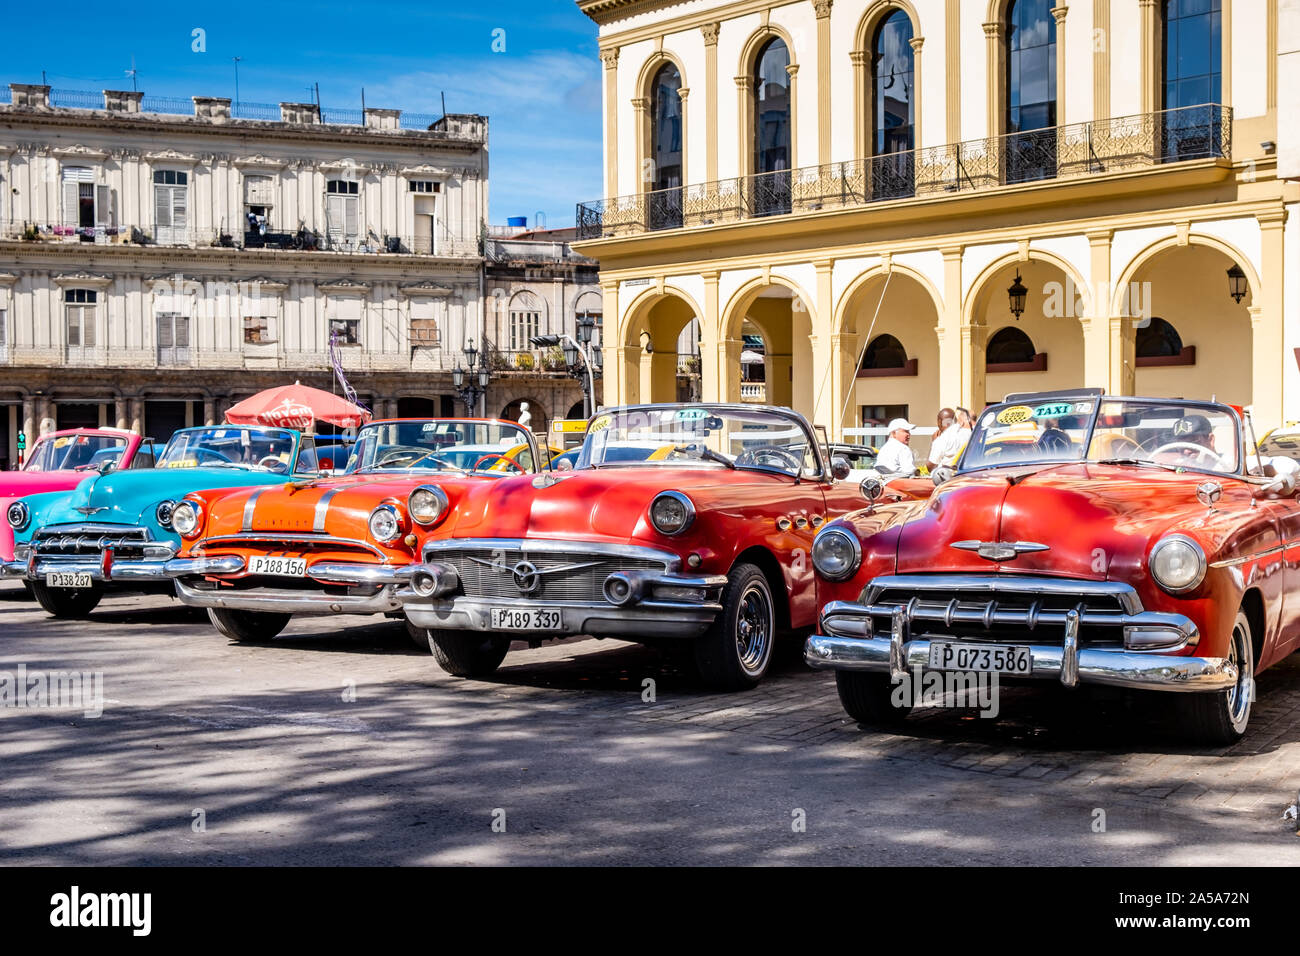 Street Scene with Vintage Classic American Taxi Cars waiting for tourists, Havana, Cuba Stock Photo